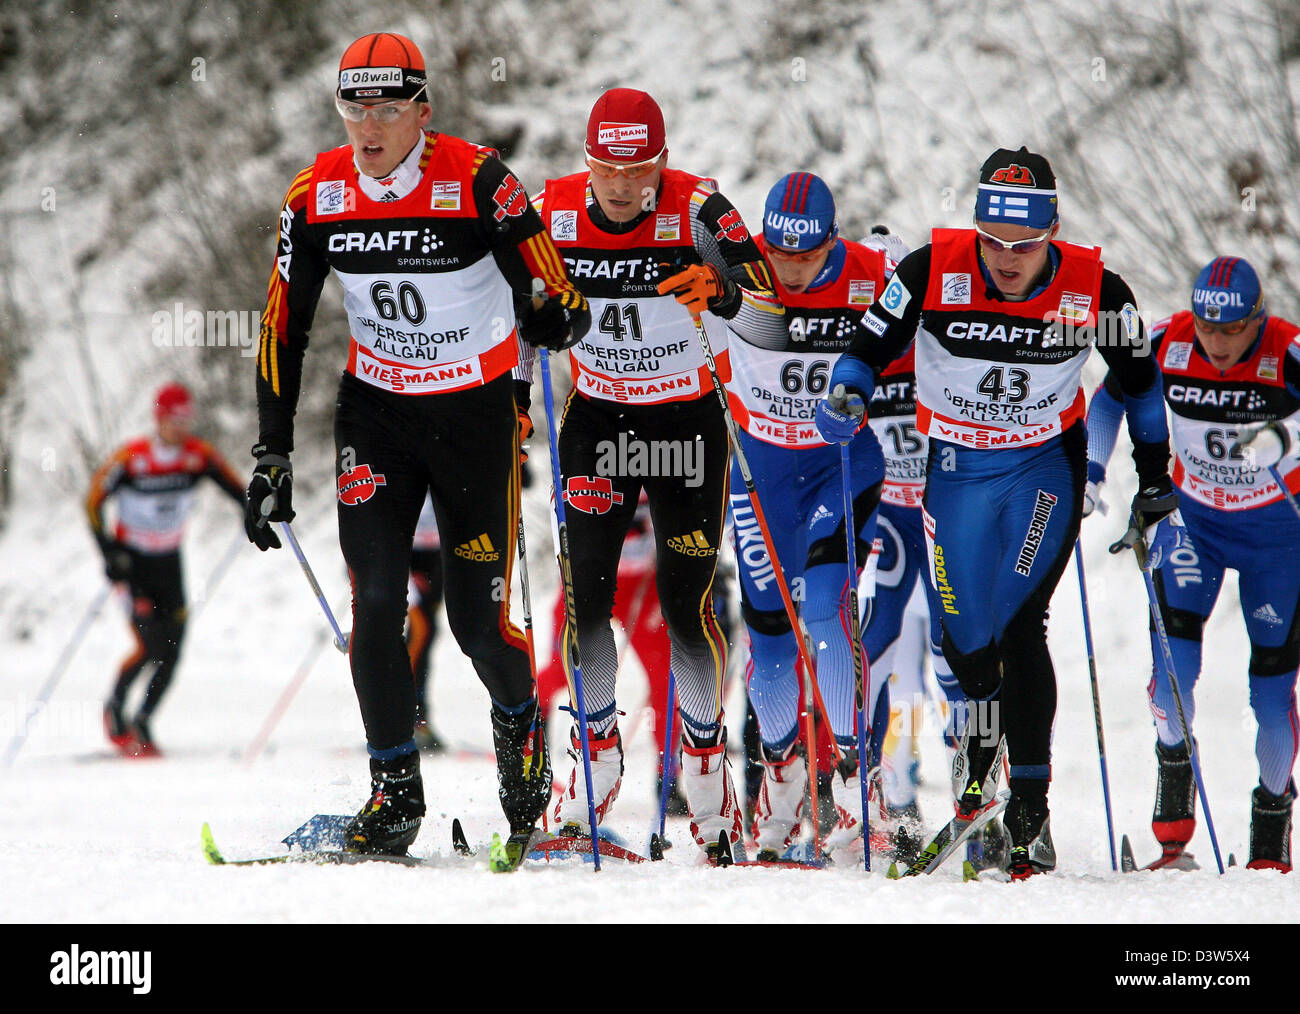 German cross-country skiers Tobias Angerer (2ndL) and Jens Filbrich (L) pictured during the 20km pursuit in Oberstdorf, Germany, Tuesday, 2 January 2007. Angerer finished 3rd as the best German. The Tour de Ski second stage in Oberstdorf is followed by the final stages in Asiago and Val di Fiemme (both Italy) until 7th January 2007. Photo: Karl-Josef Hildenbrand Stock Photo